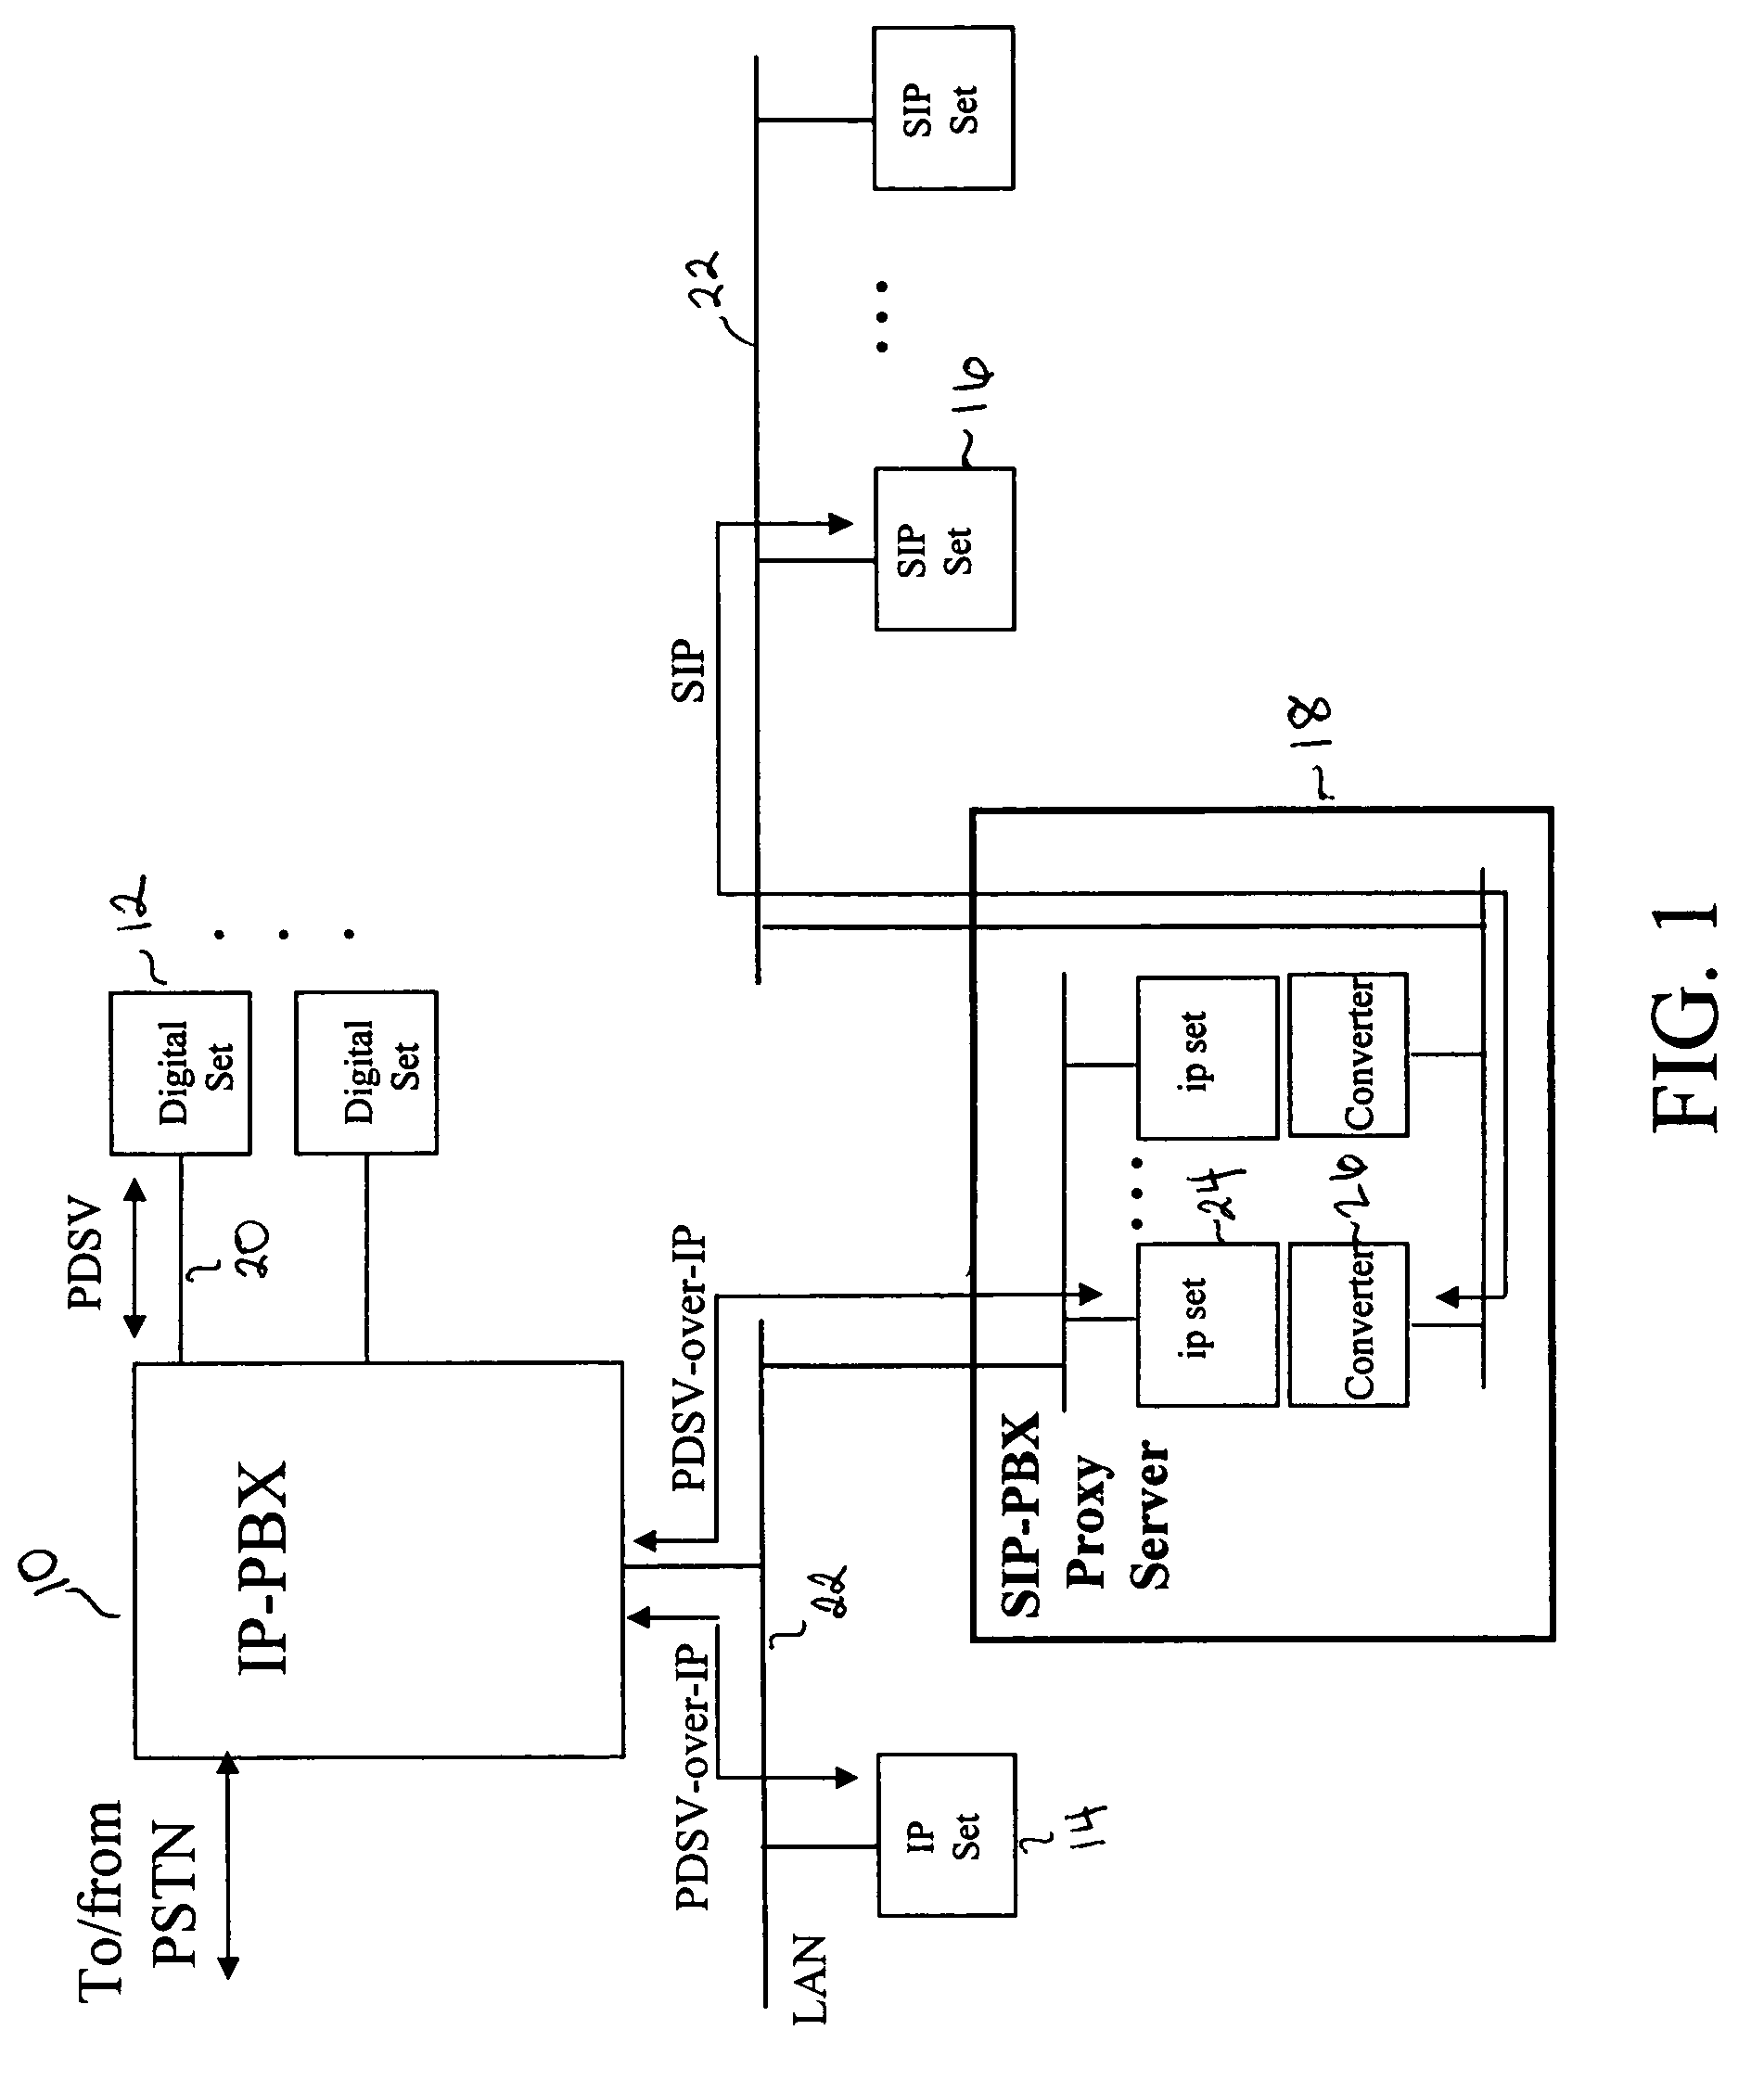 System and method for interfacing legacy IP-PBX systems to SIP networks